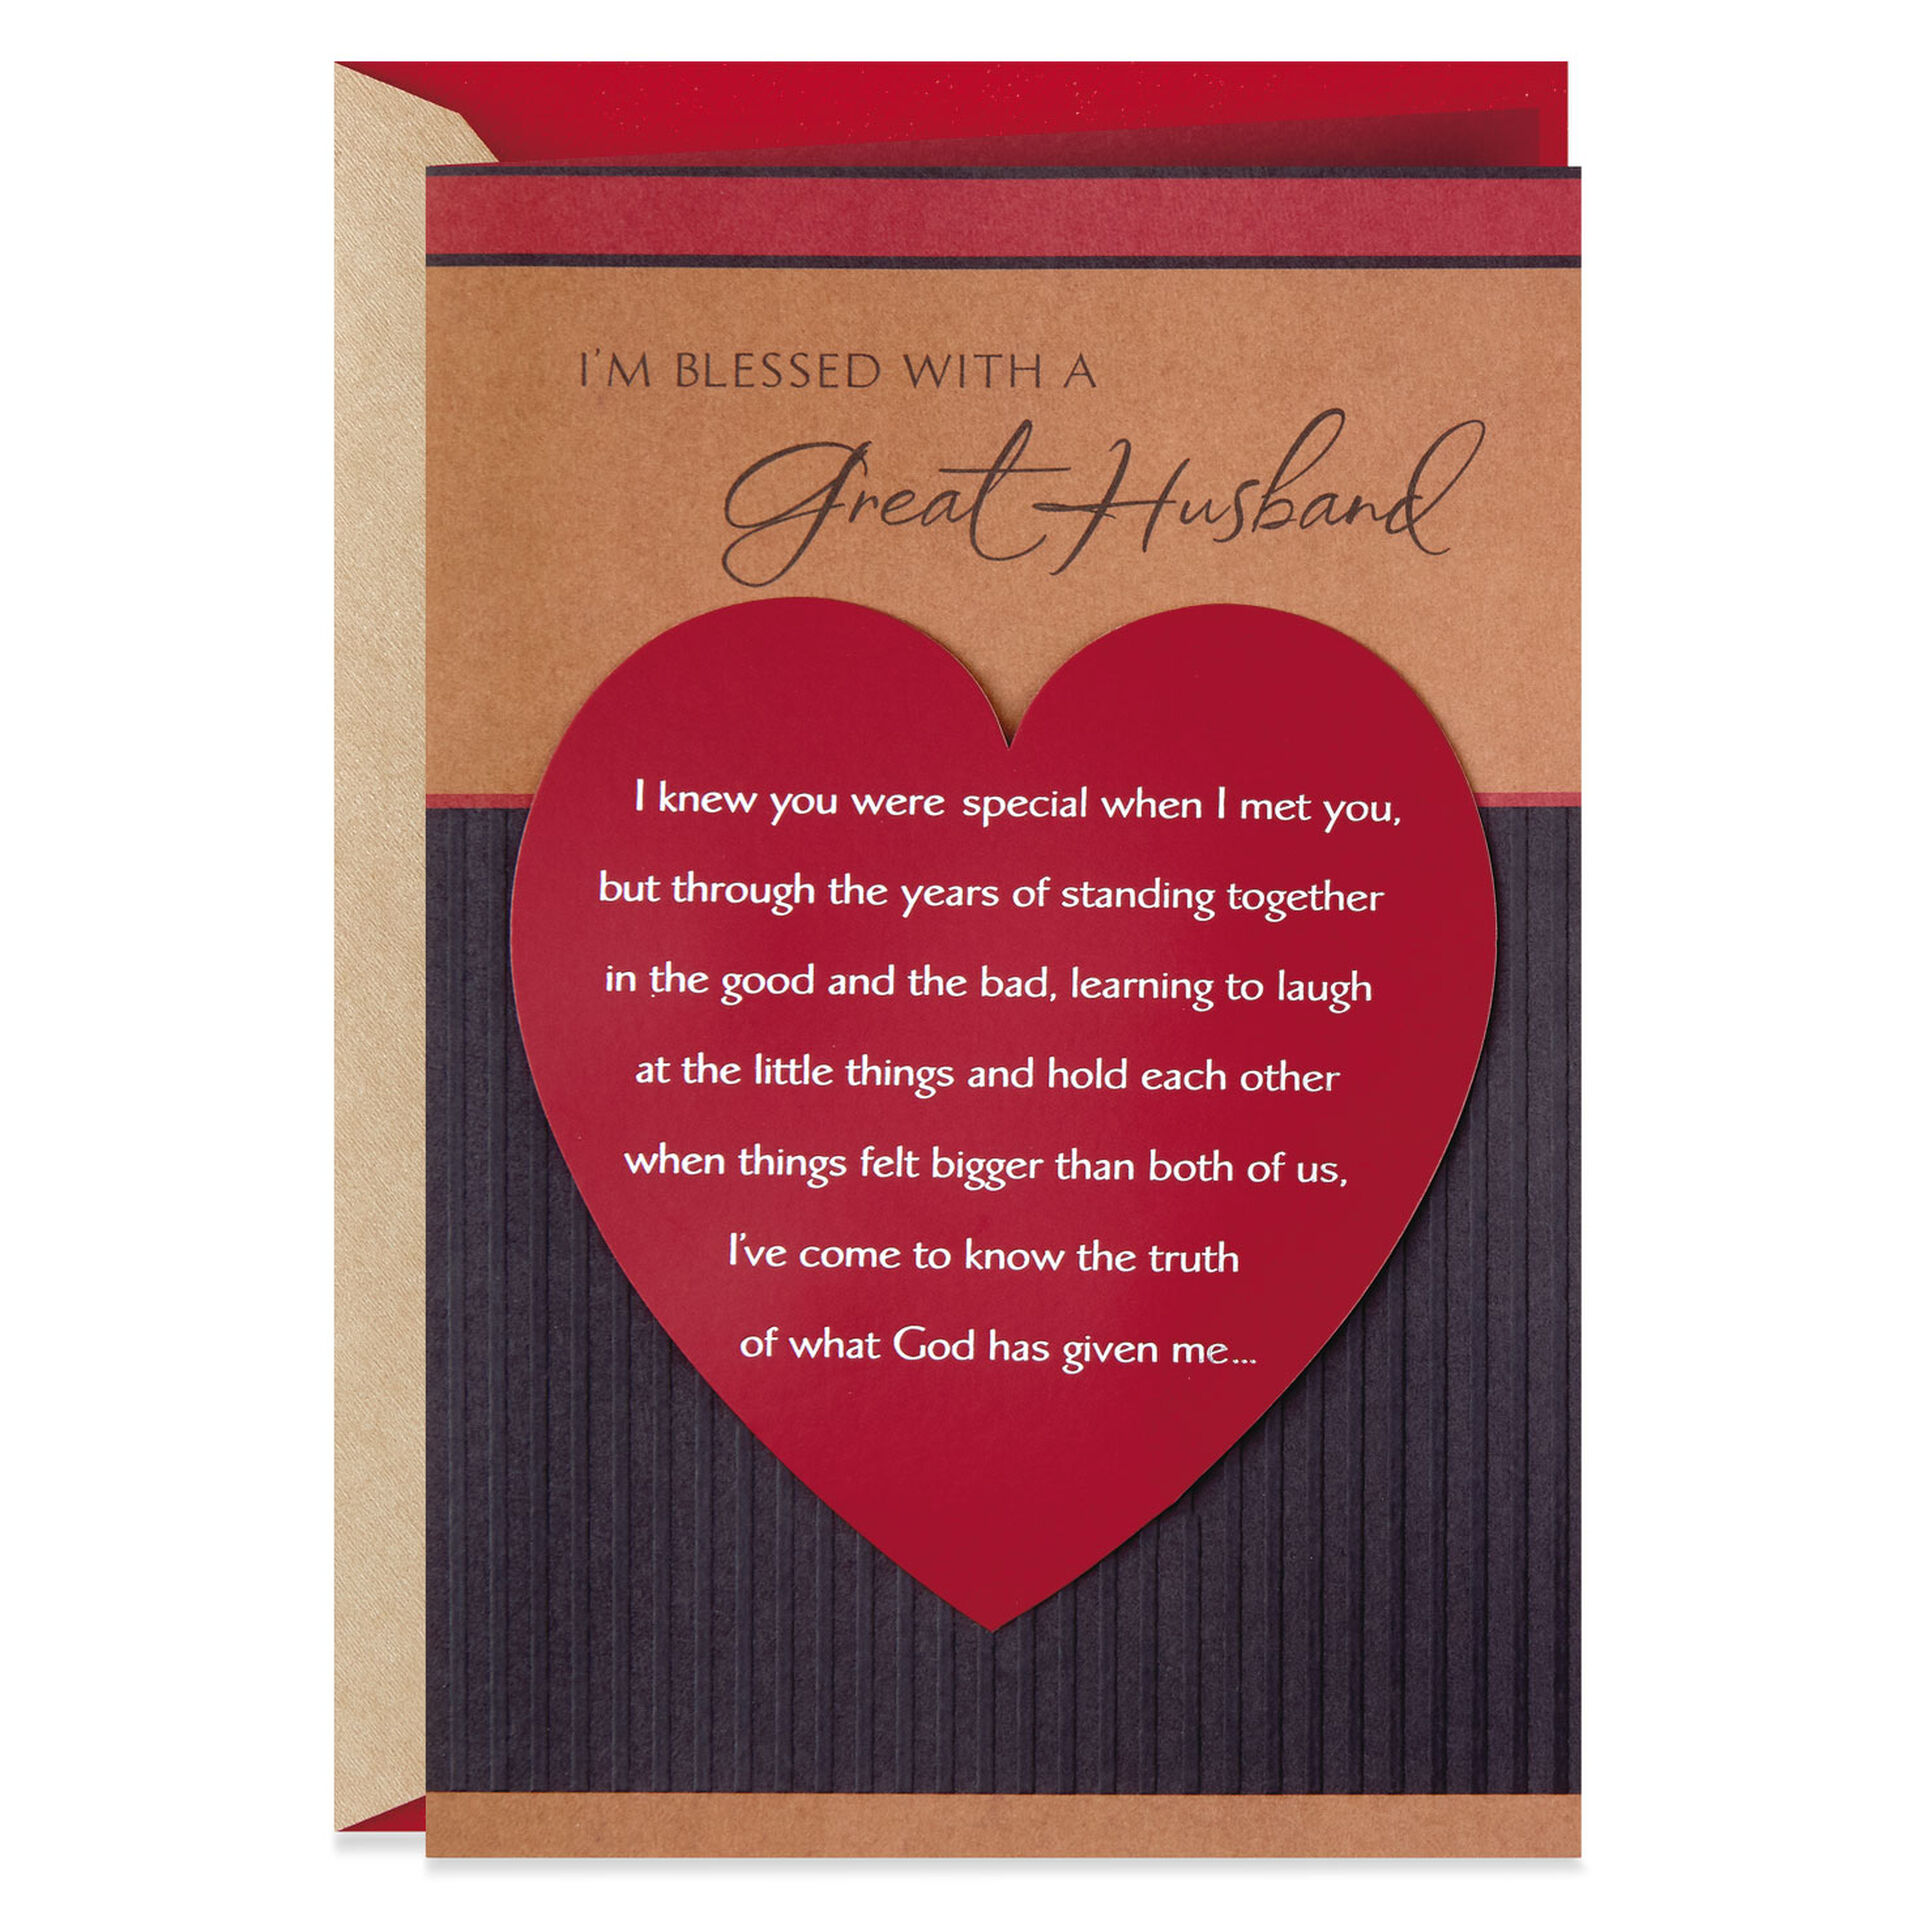 exceptional-man-religious-valentine-s-day-card-for-husband-greeting